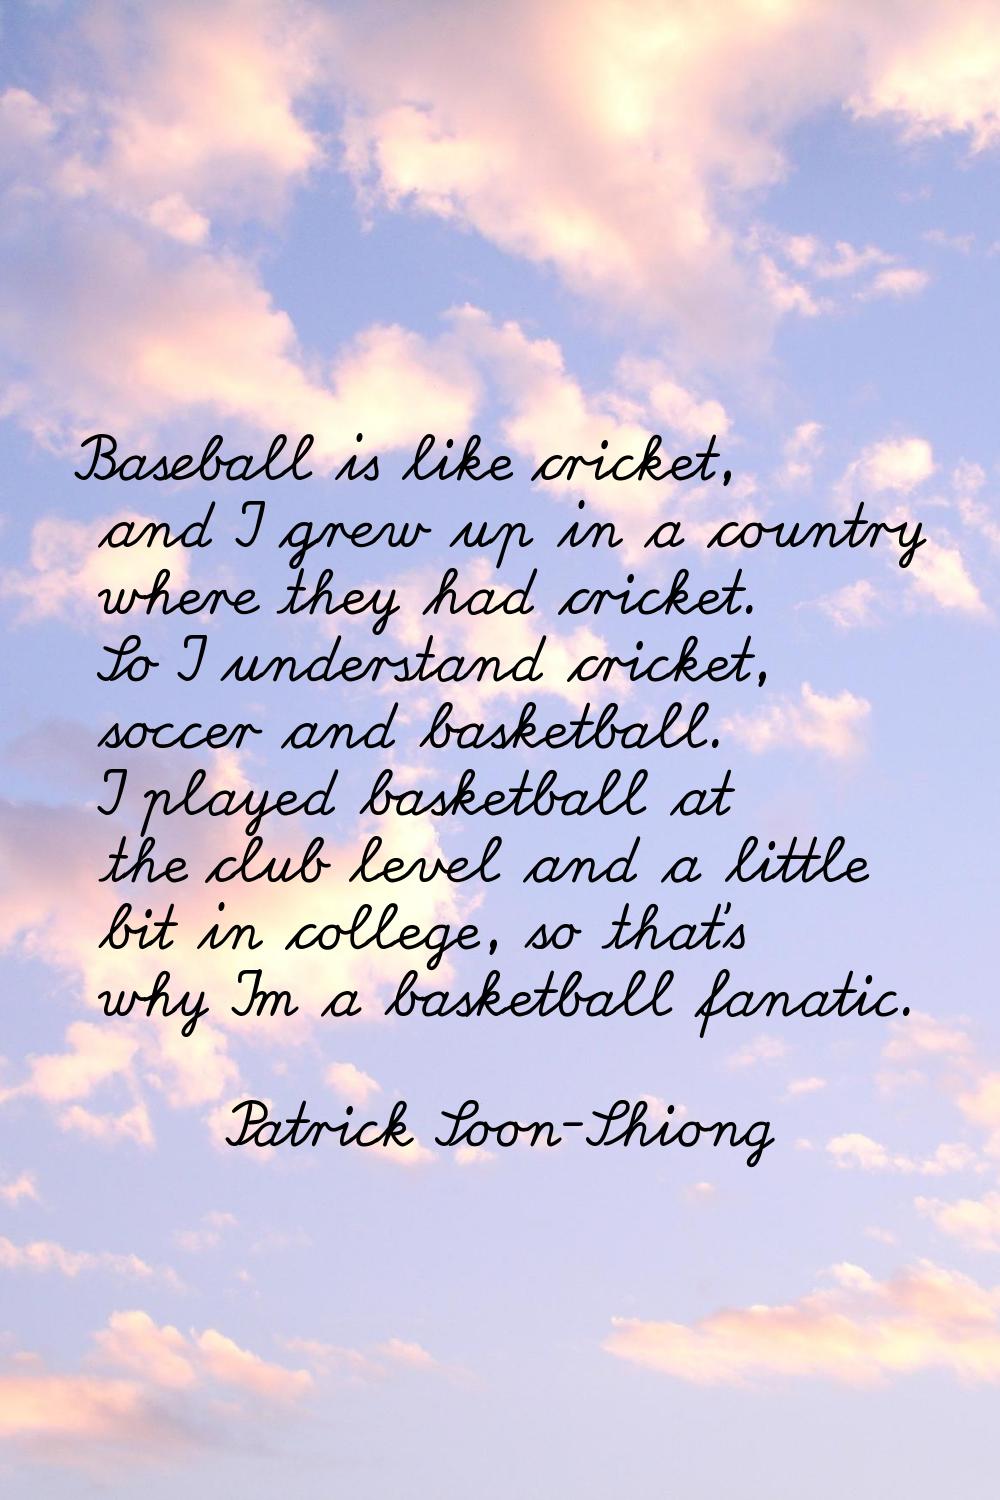 Baseball is like cricket, and I grew up in a country where they had cricket. So I understand cricke